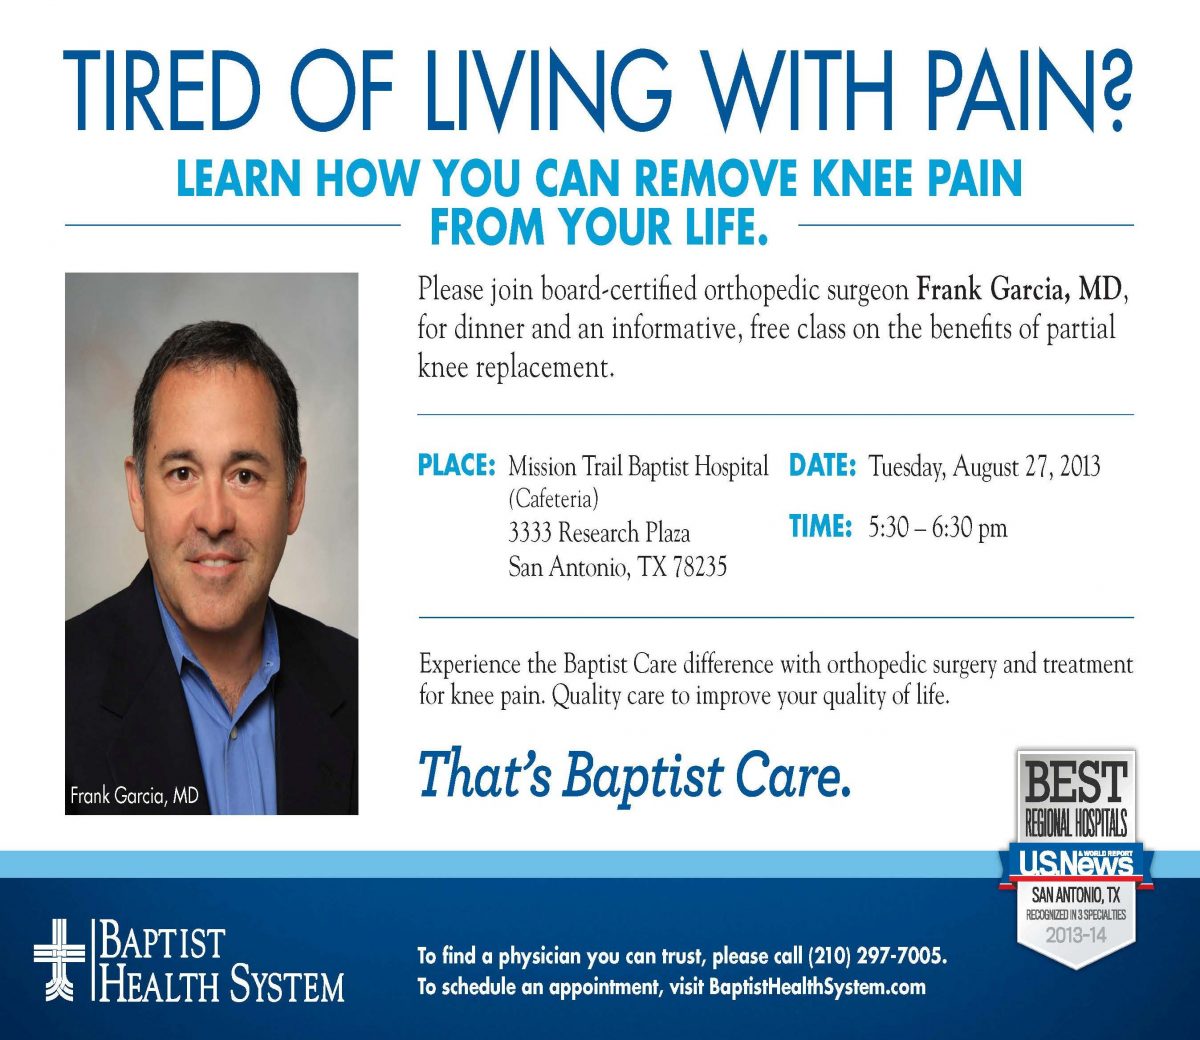 Learn and Dine with Dr. Frank Garcia on Tuesday, August 27th